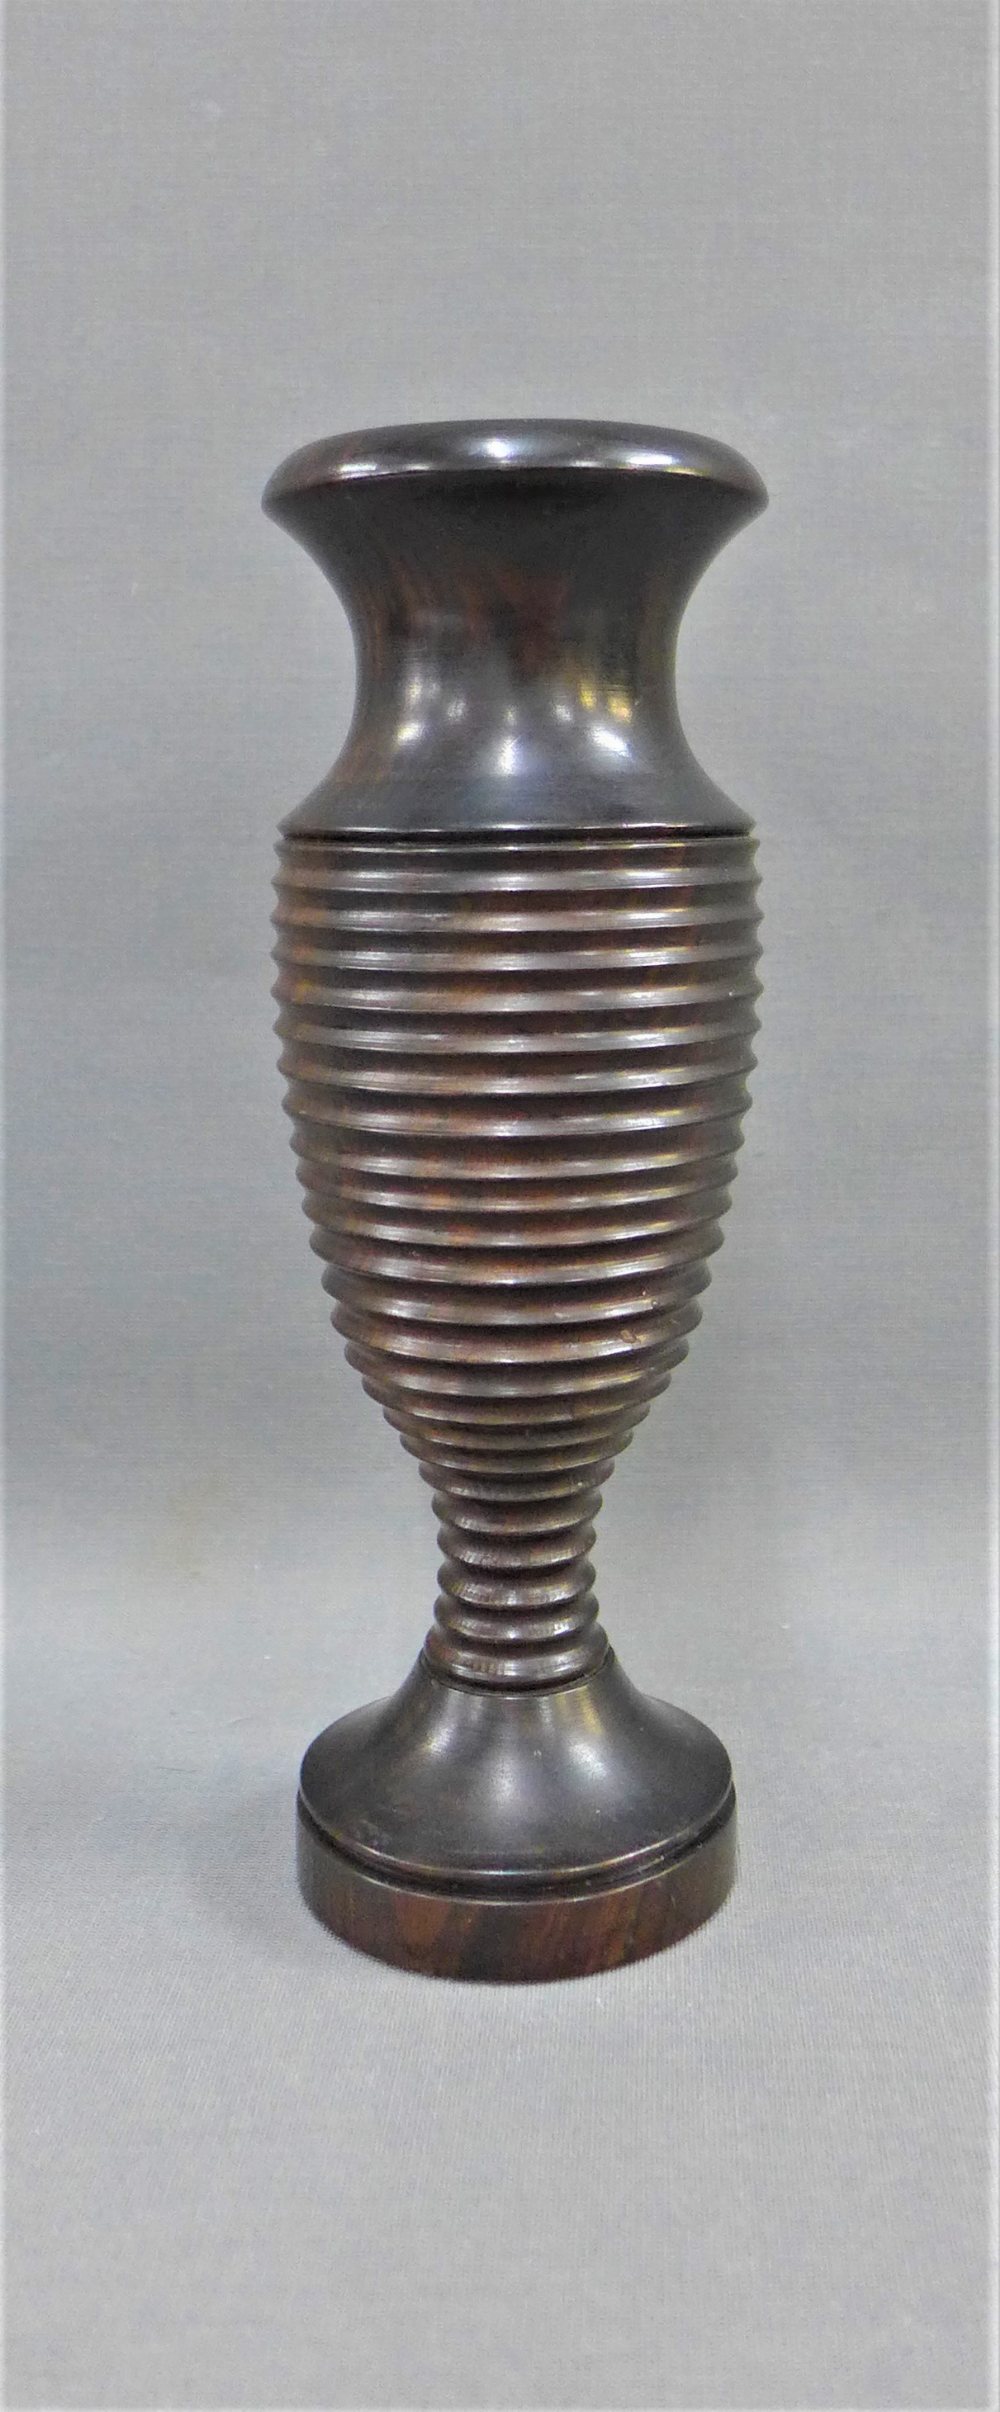 Wooden baluster vase, possibly Lignum Vitae with a ribbed pattern to the body and a circular foot